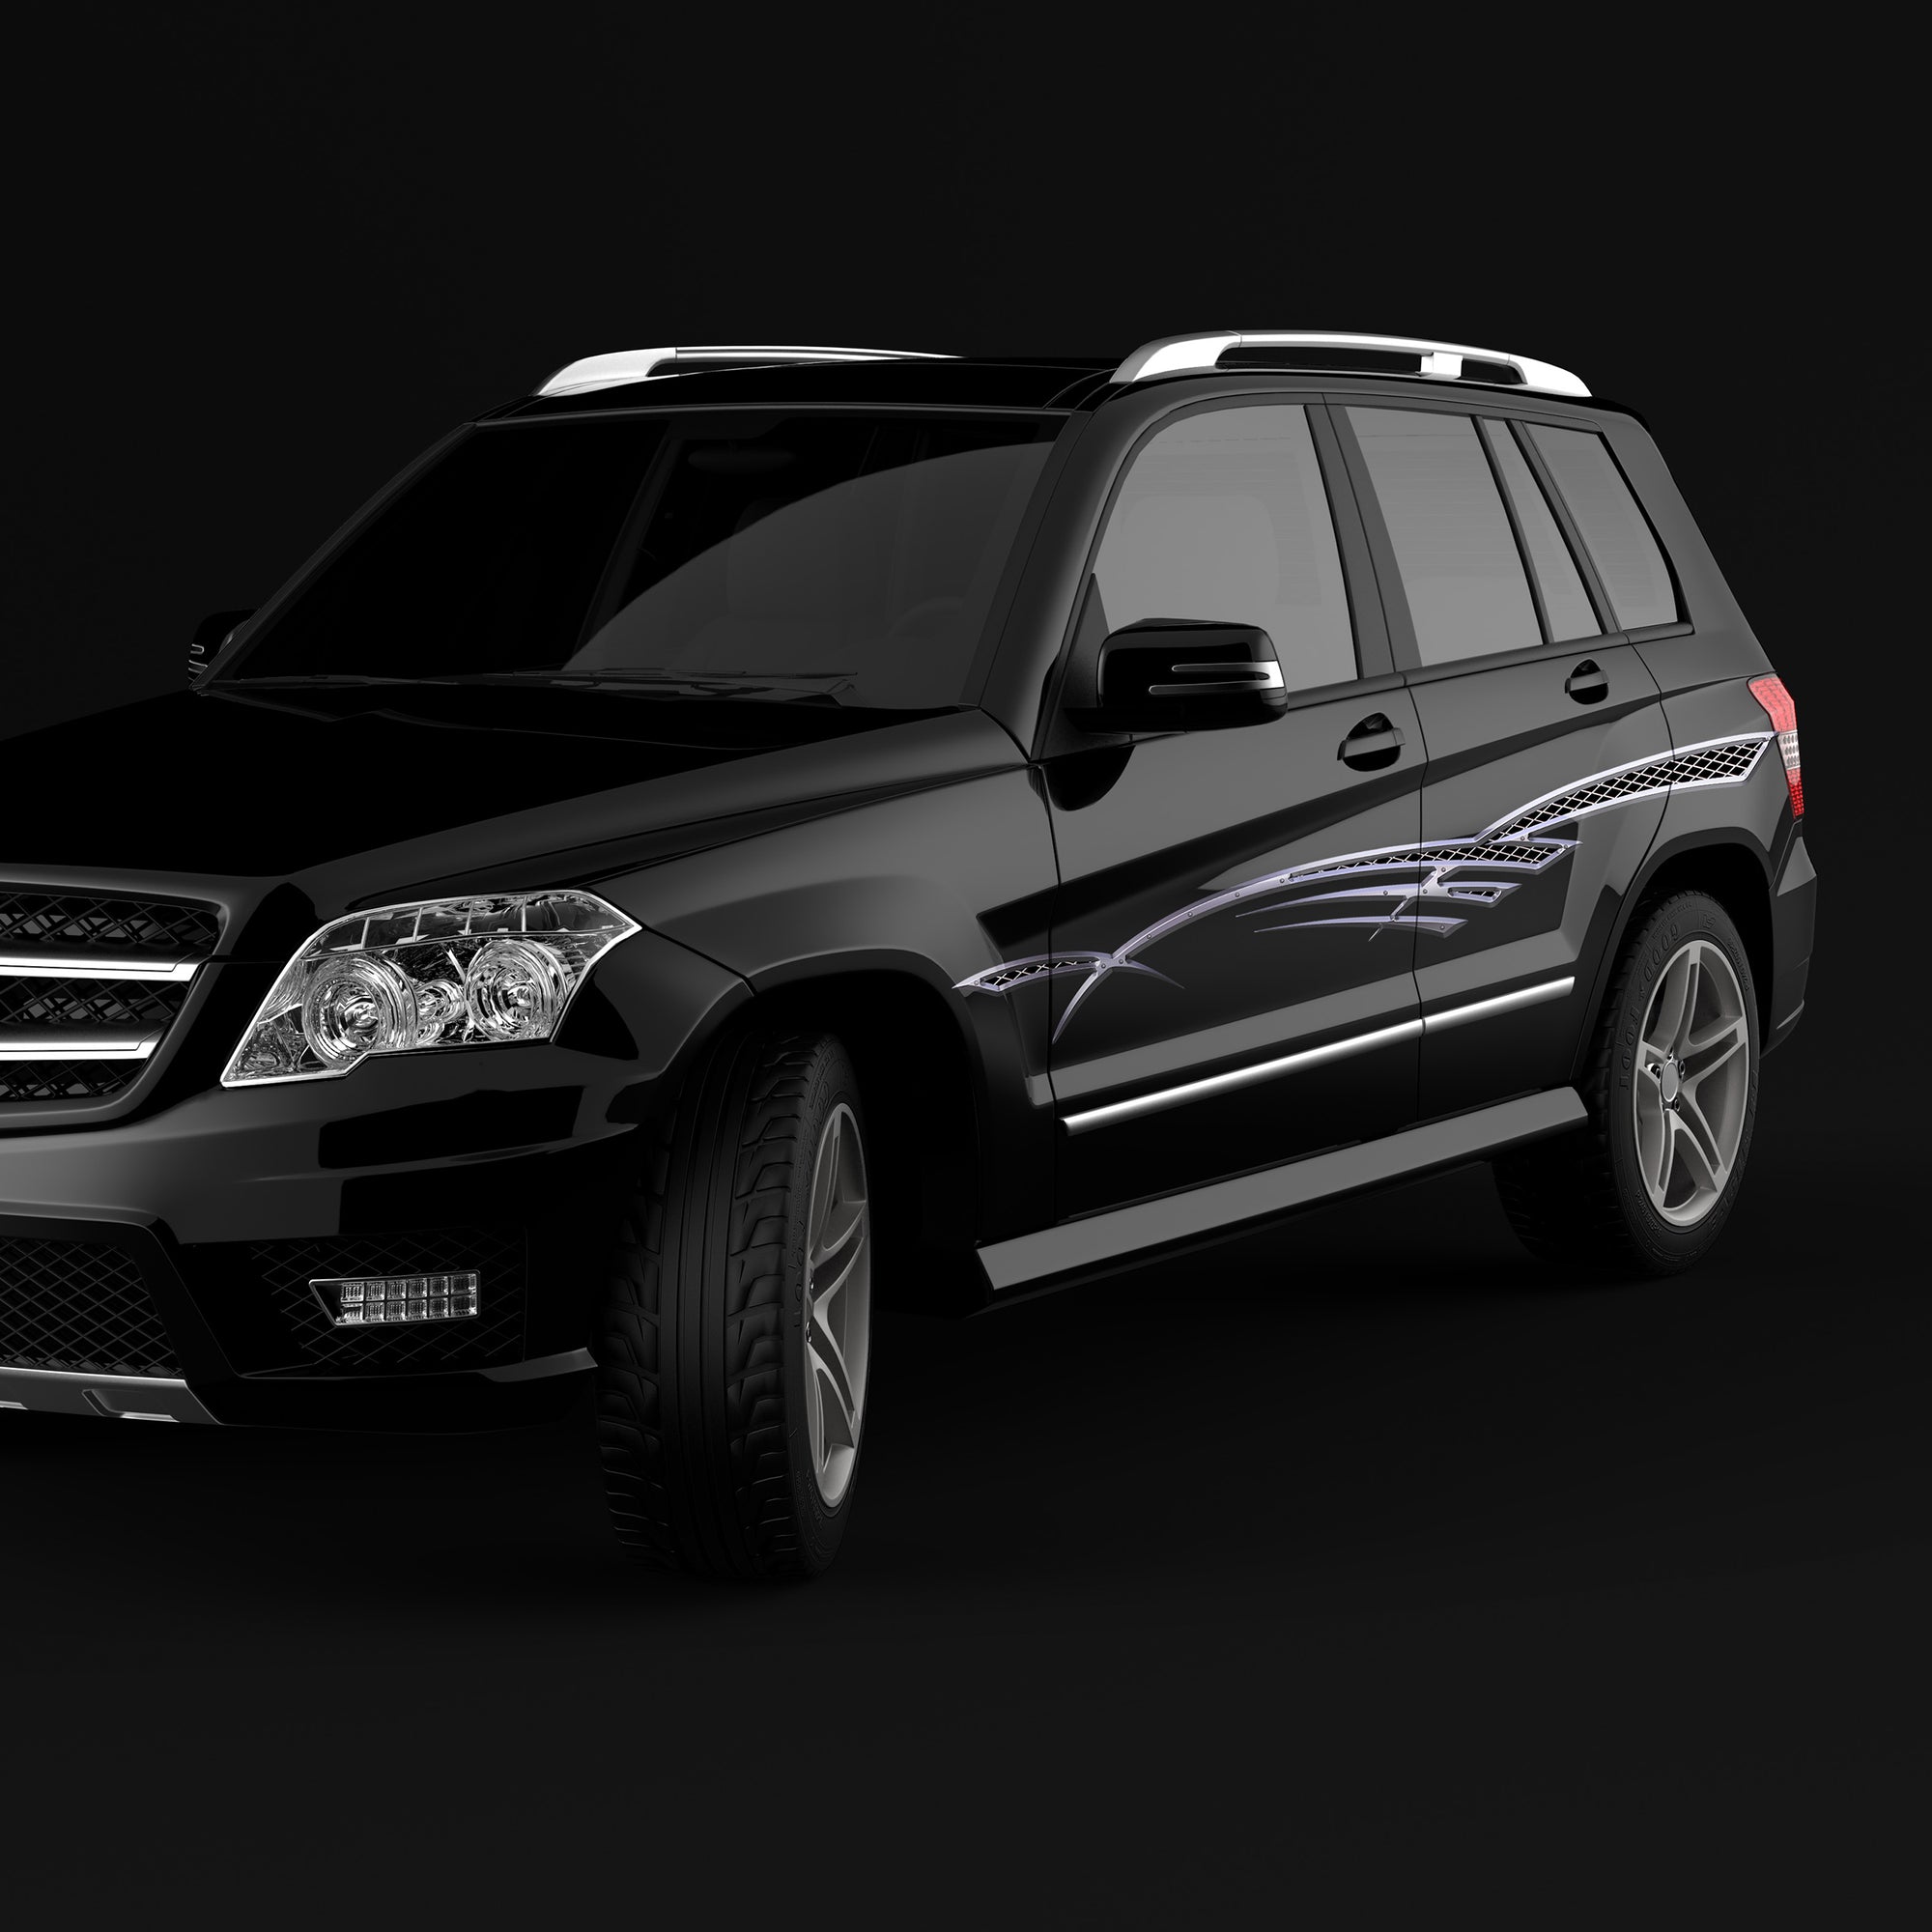 metal style vinyl graphic stripes on the side of black suv